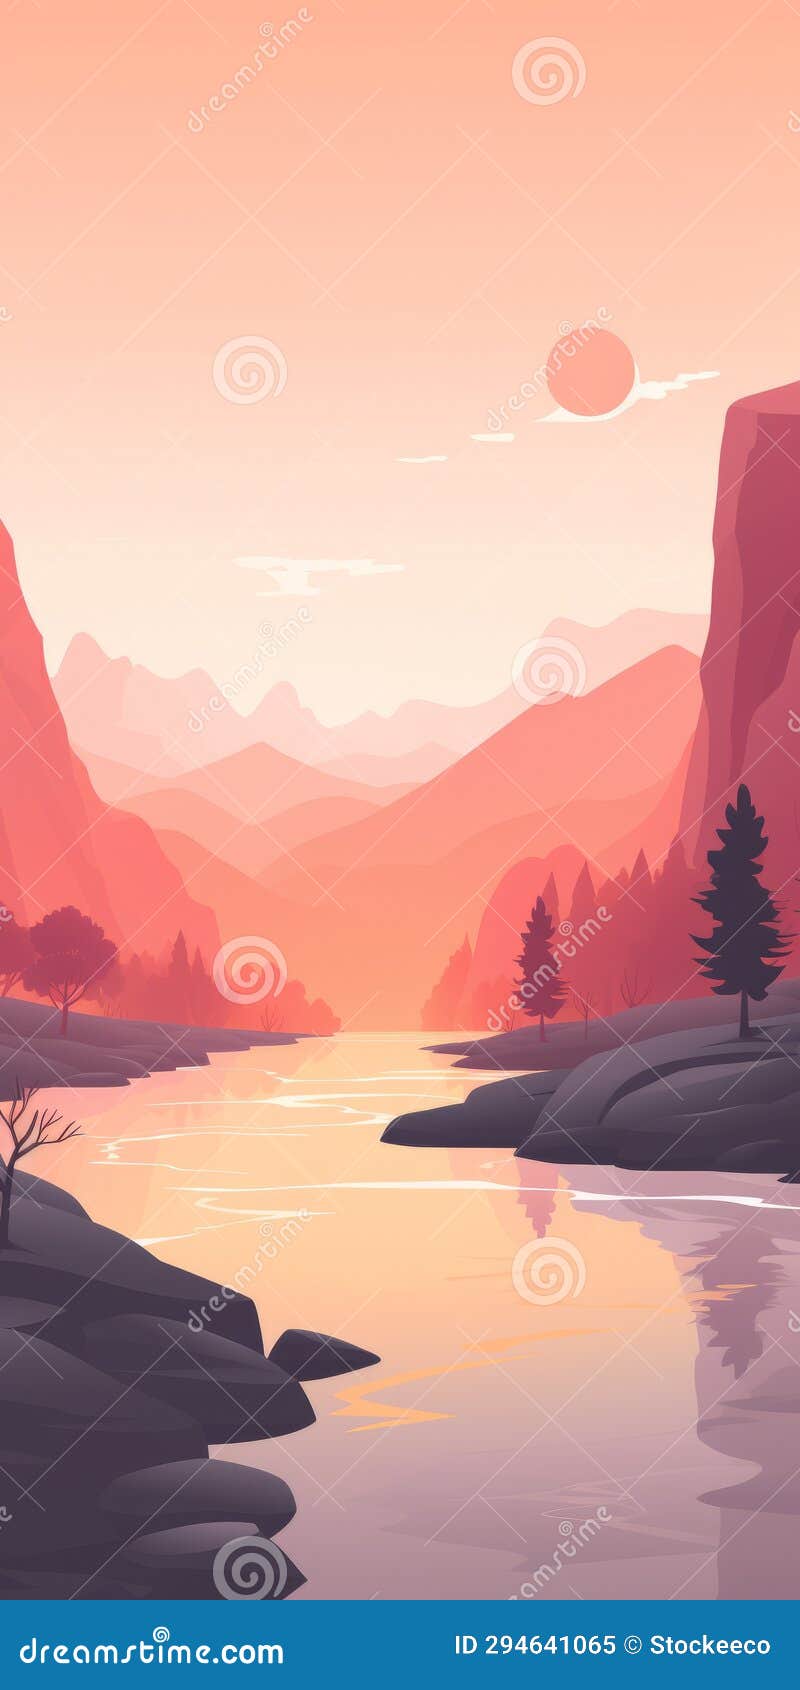 minimalistic watercolor scenery: tranquil river surrounded by caves and trees